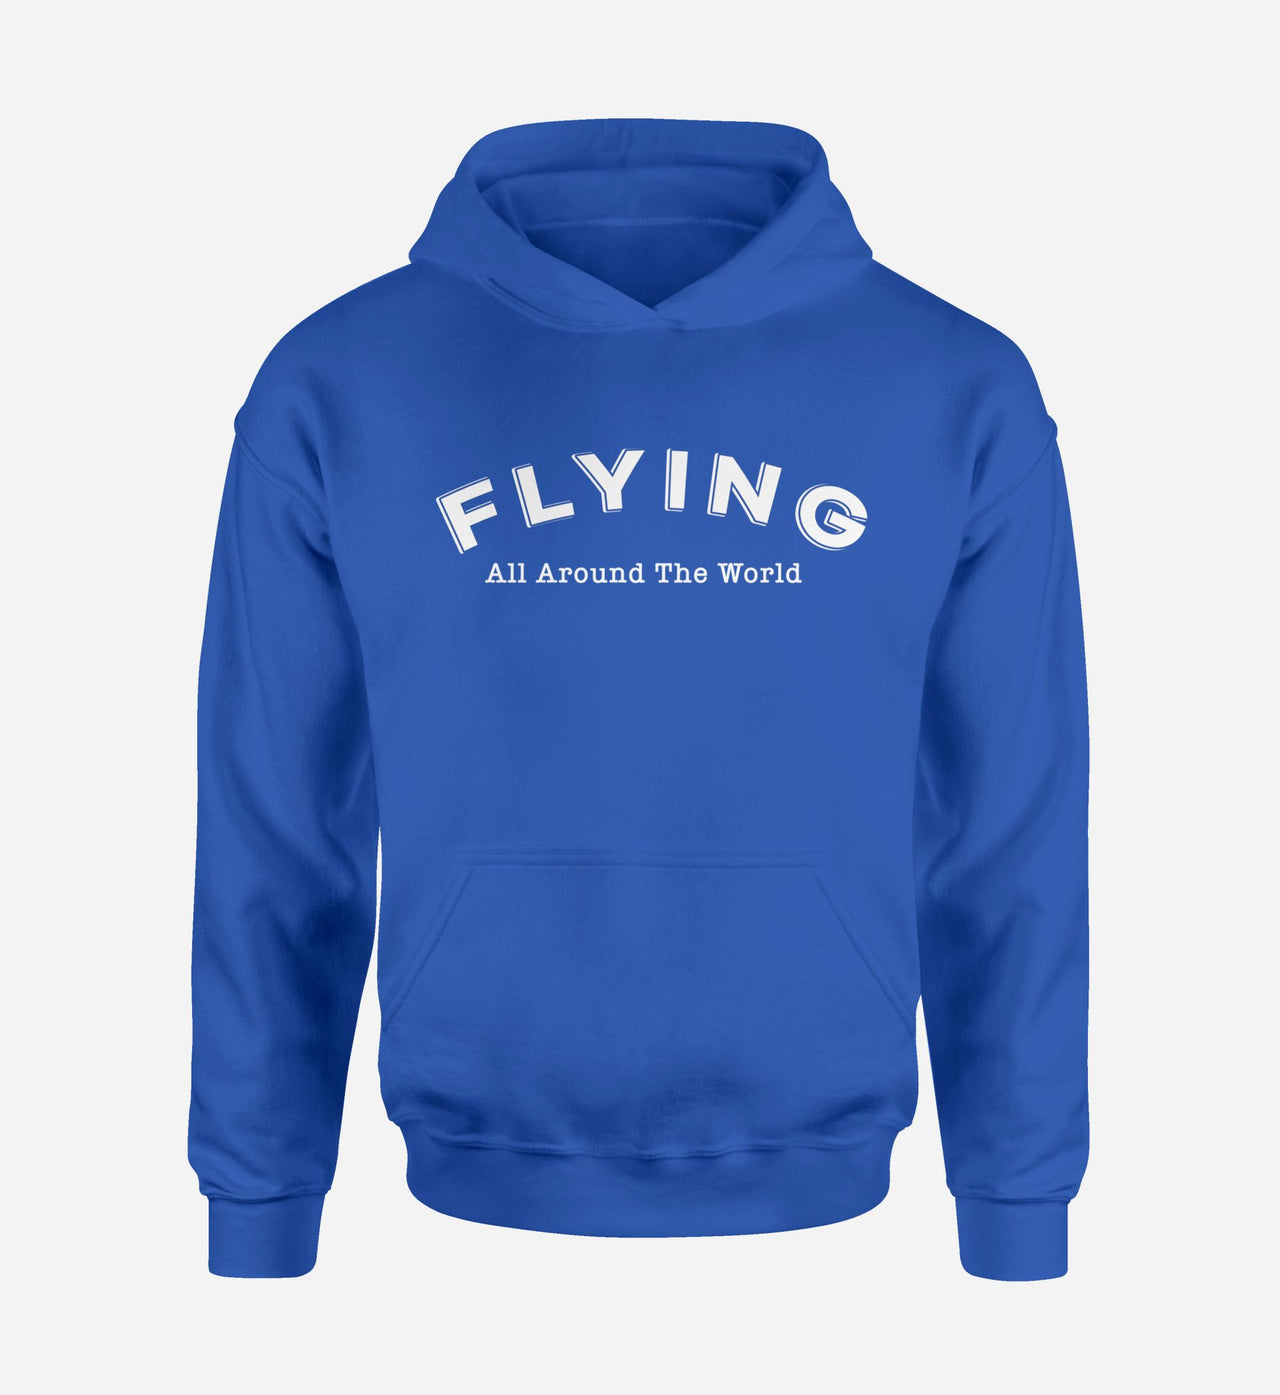 Flying All Around The World Designed Hoodies